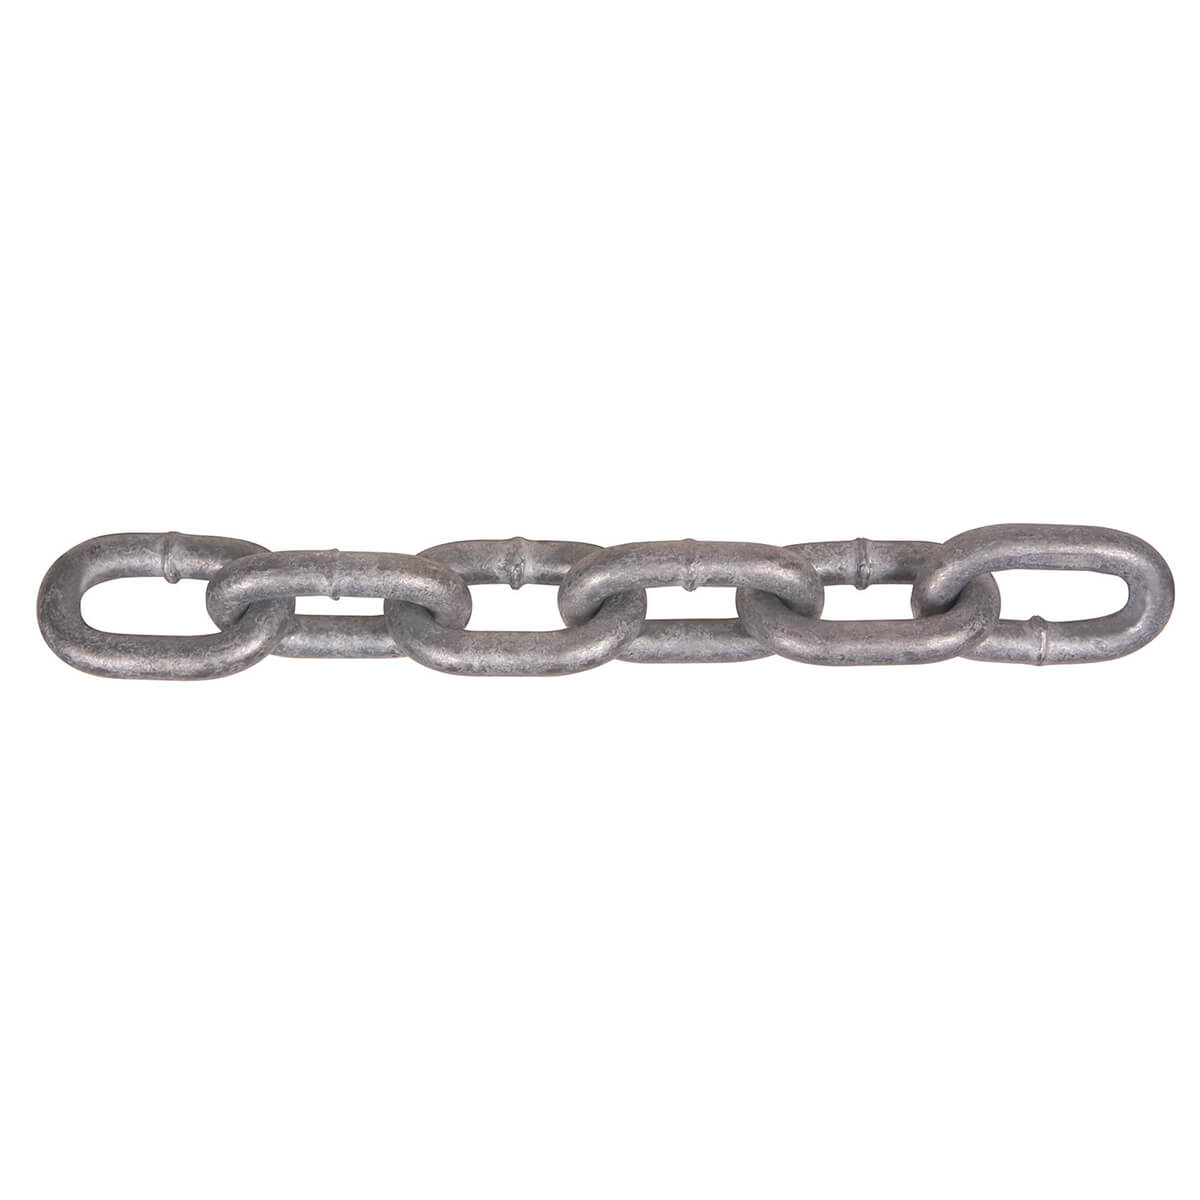 5/16" Grade 30 Utility Chain, Hot Dipped Galvanized